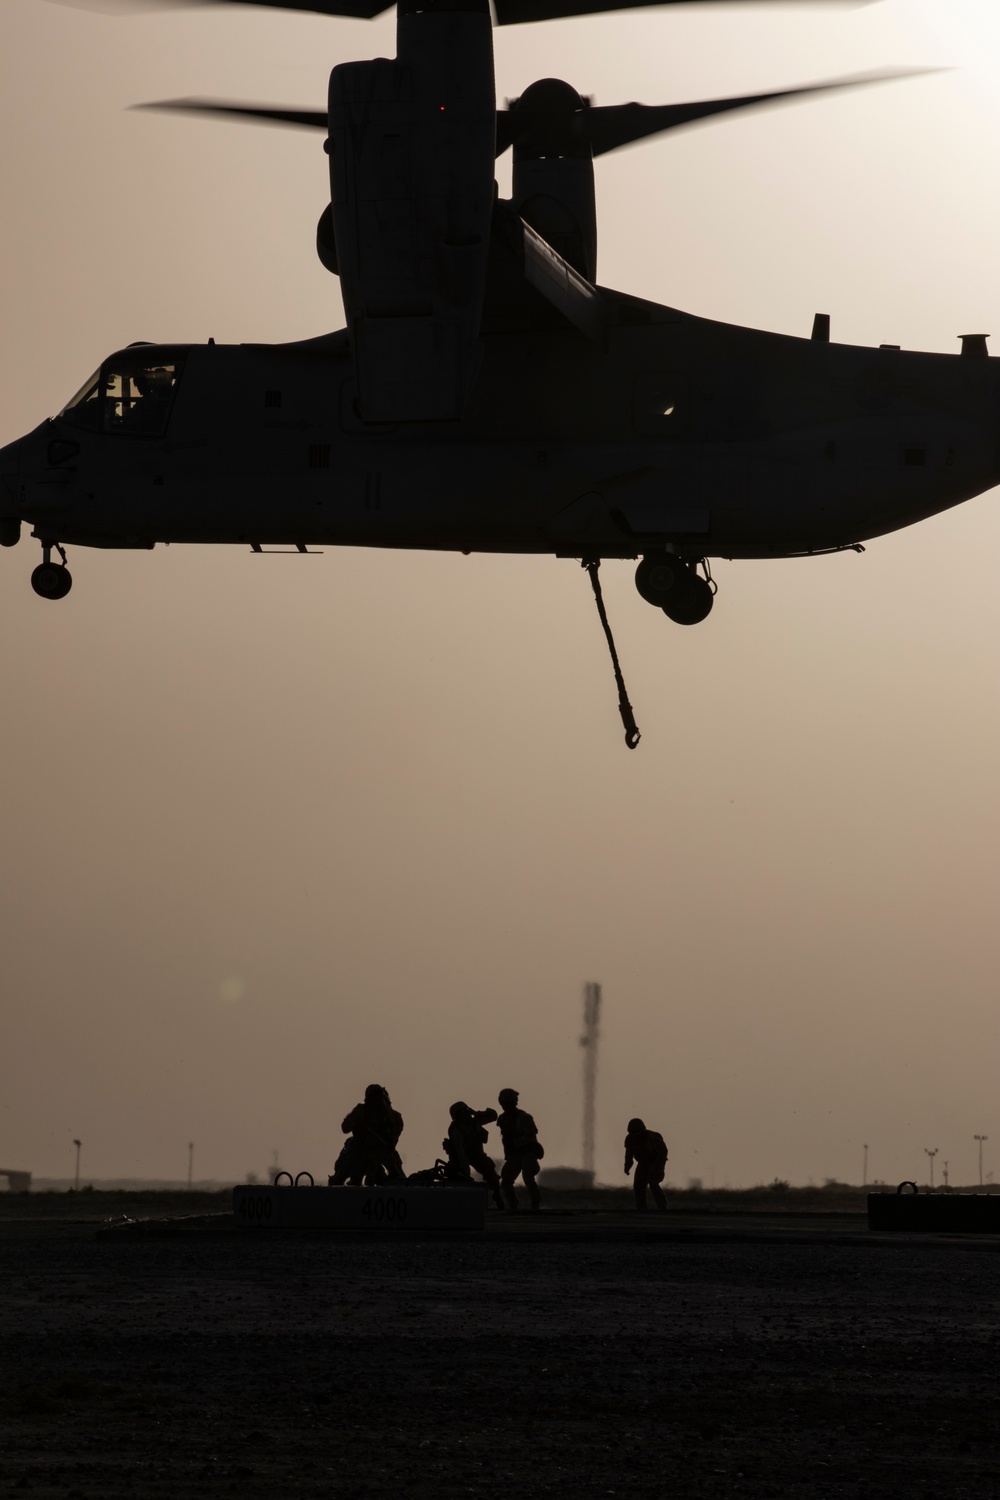 22nd MEU Helicopter Support Team Training